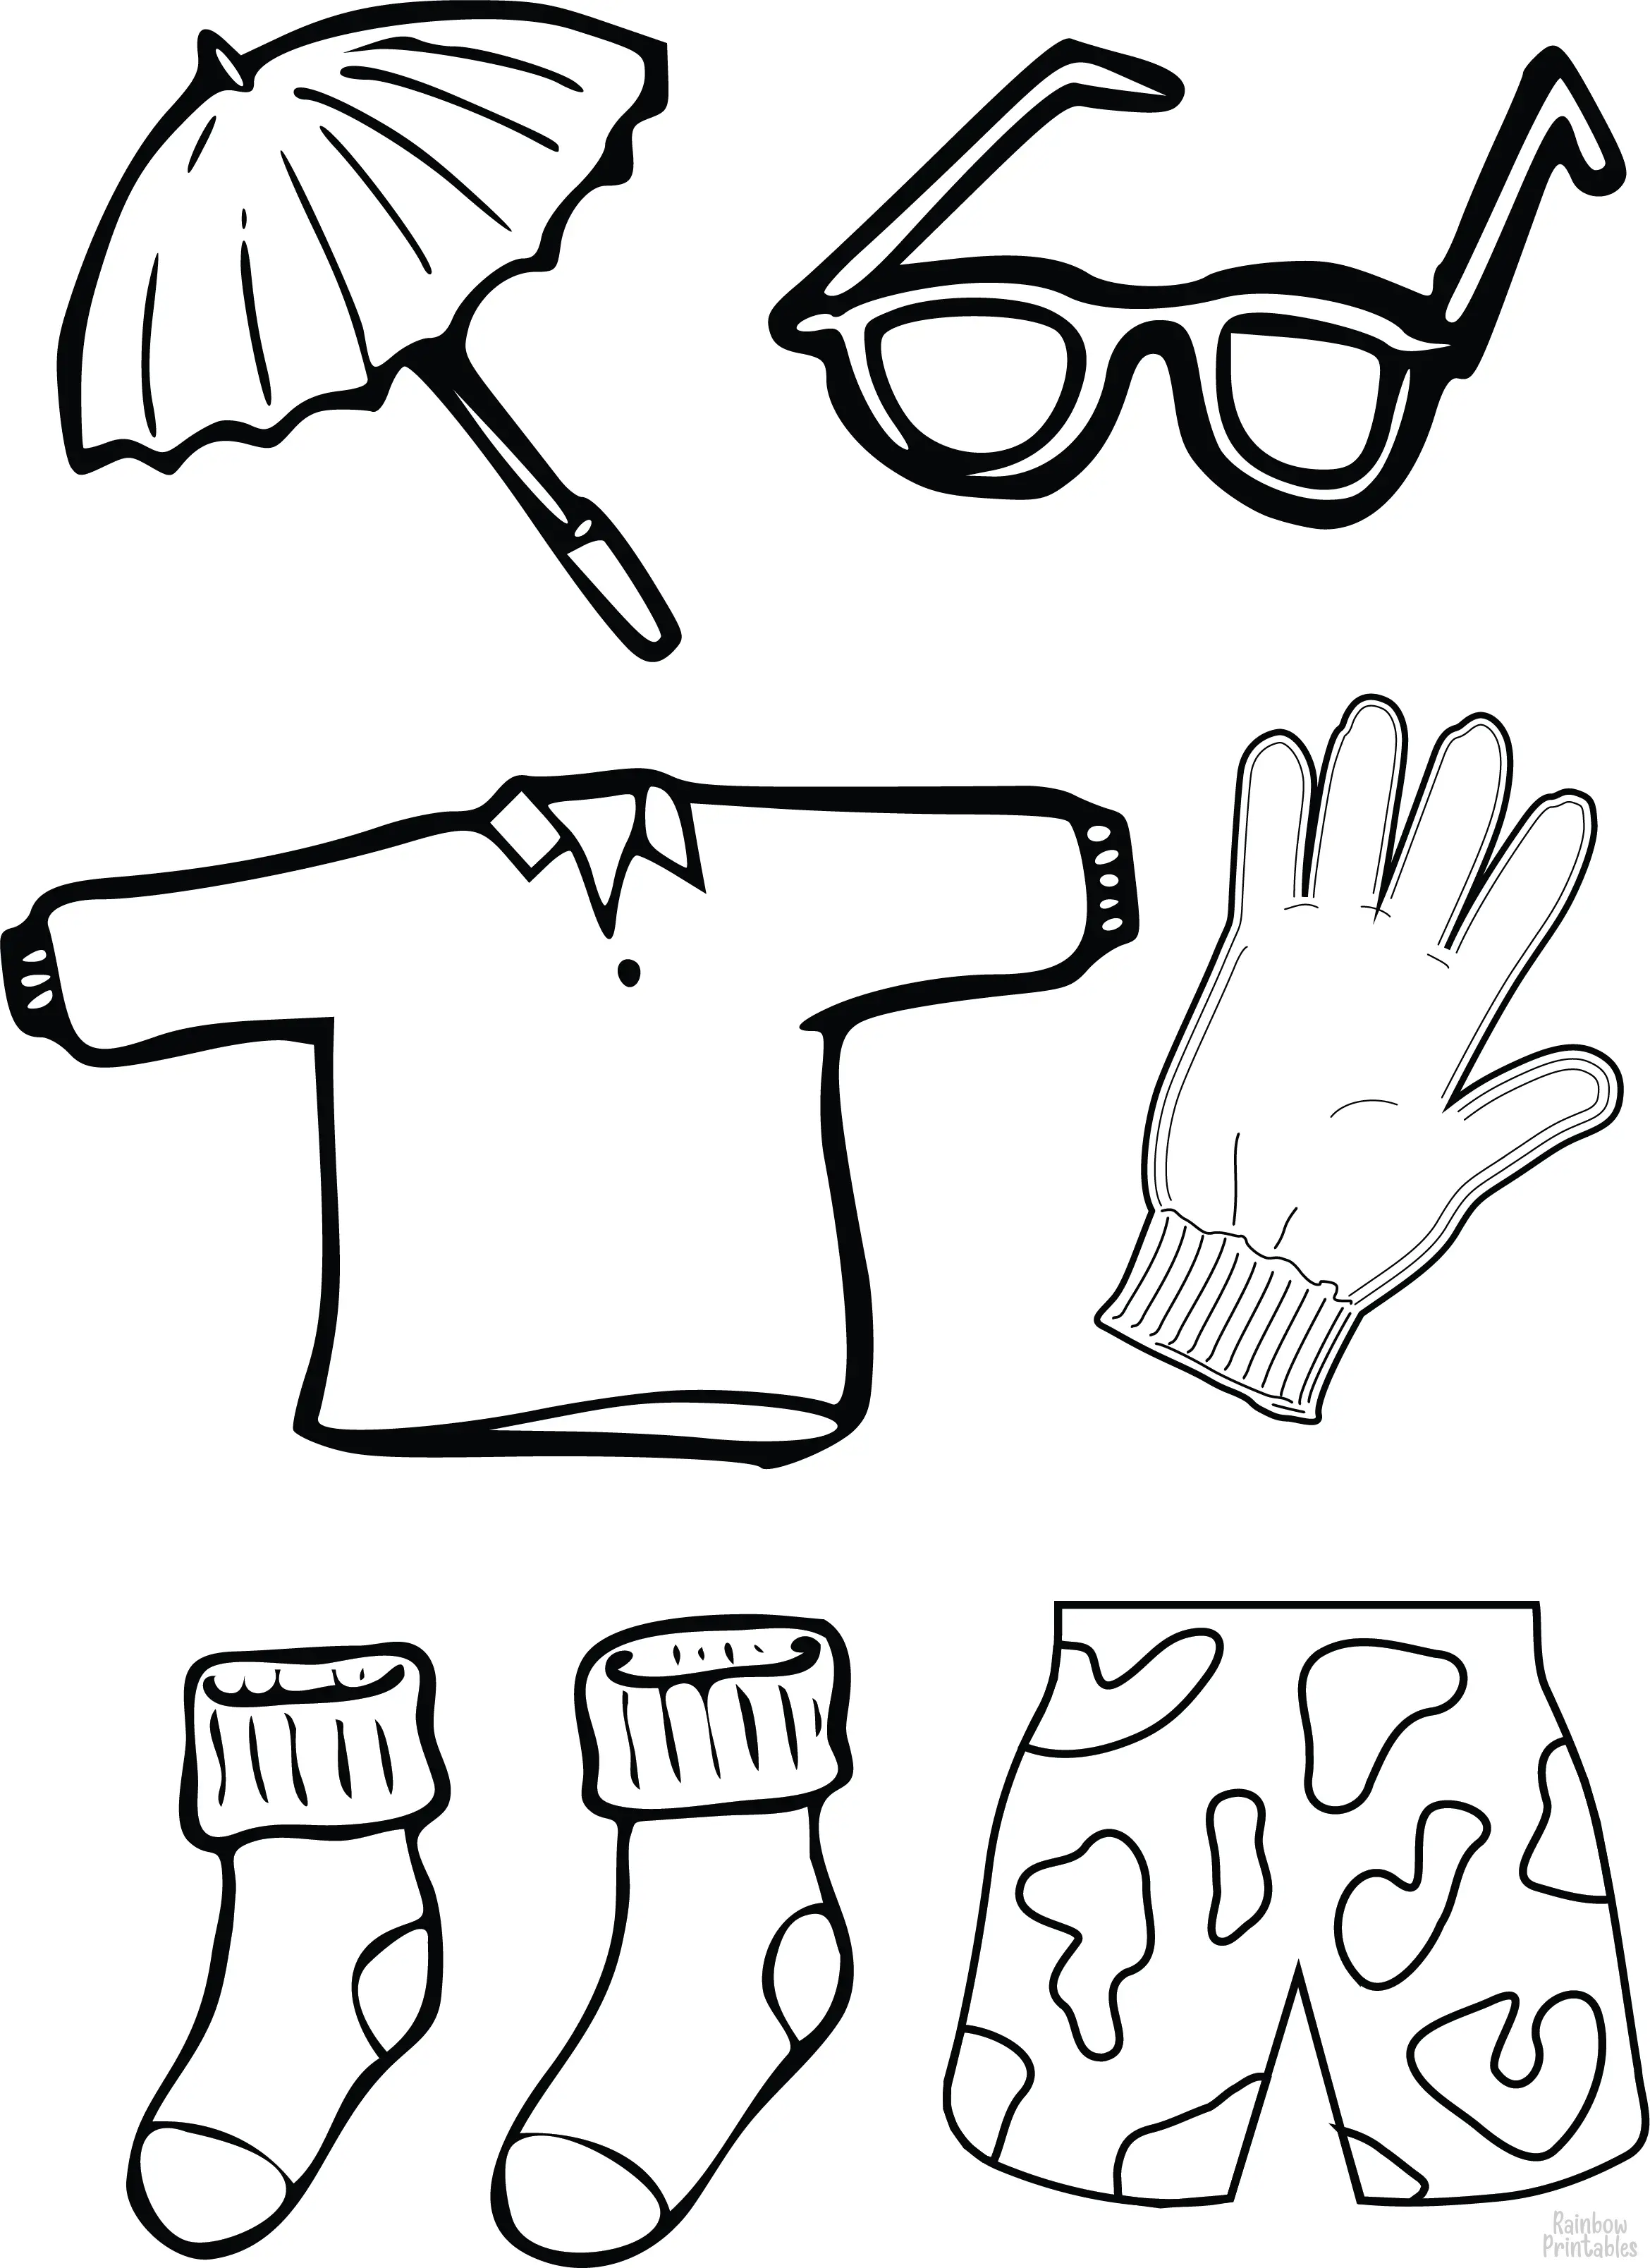 Clothing Set Shirt Socks Glove Umbrella Sun Glasses Coloring Activity Pages for Kids